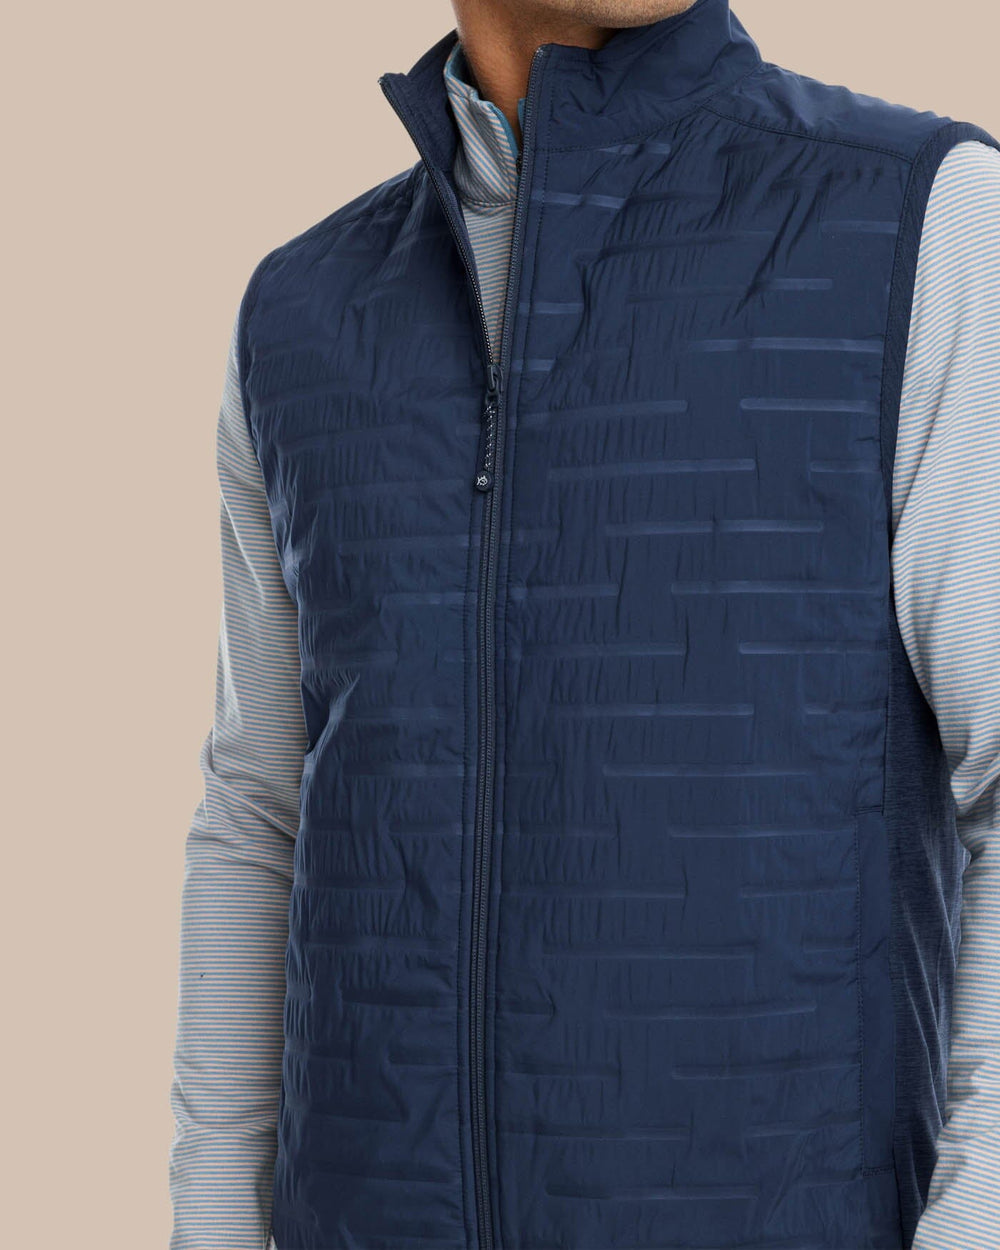 The model detail view of the Men's Abercorn Performance Vest by Southern Tide - True Navy